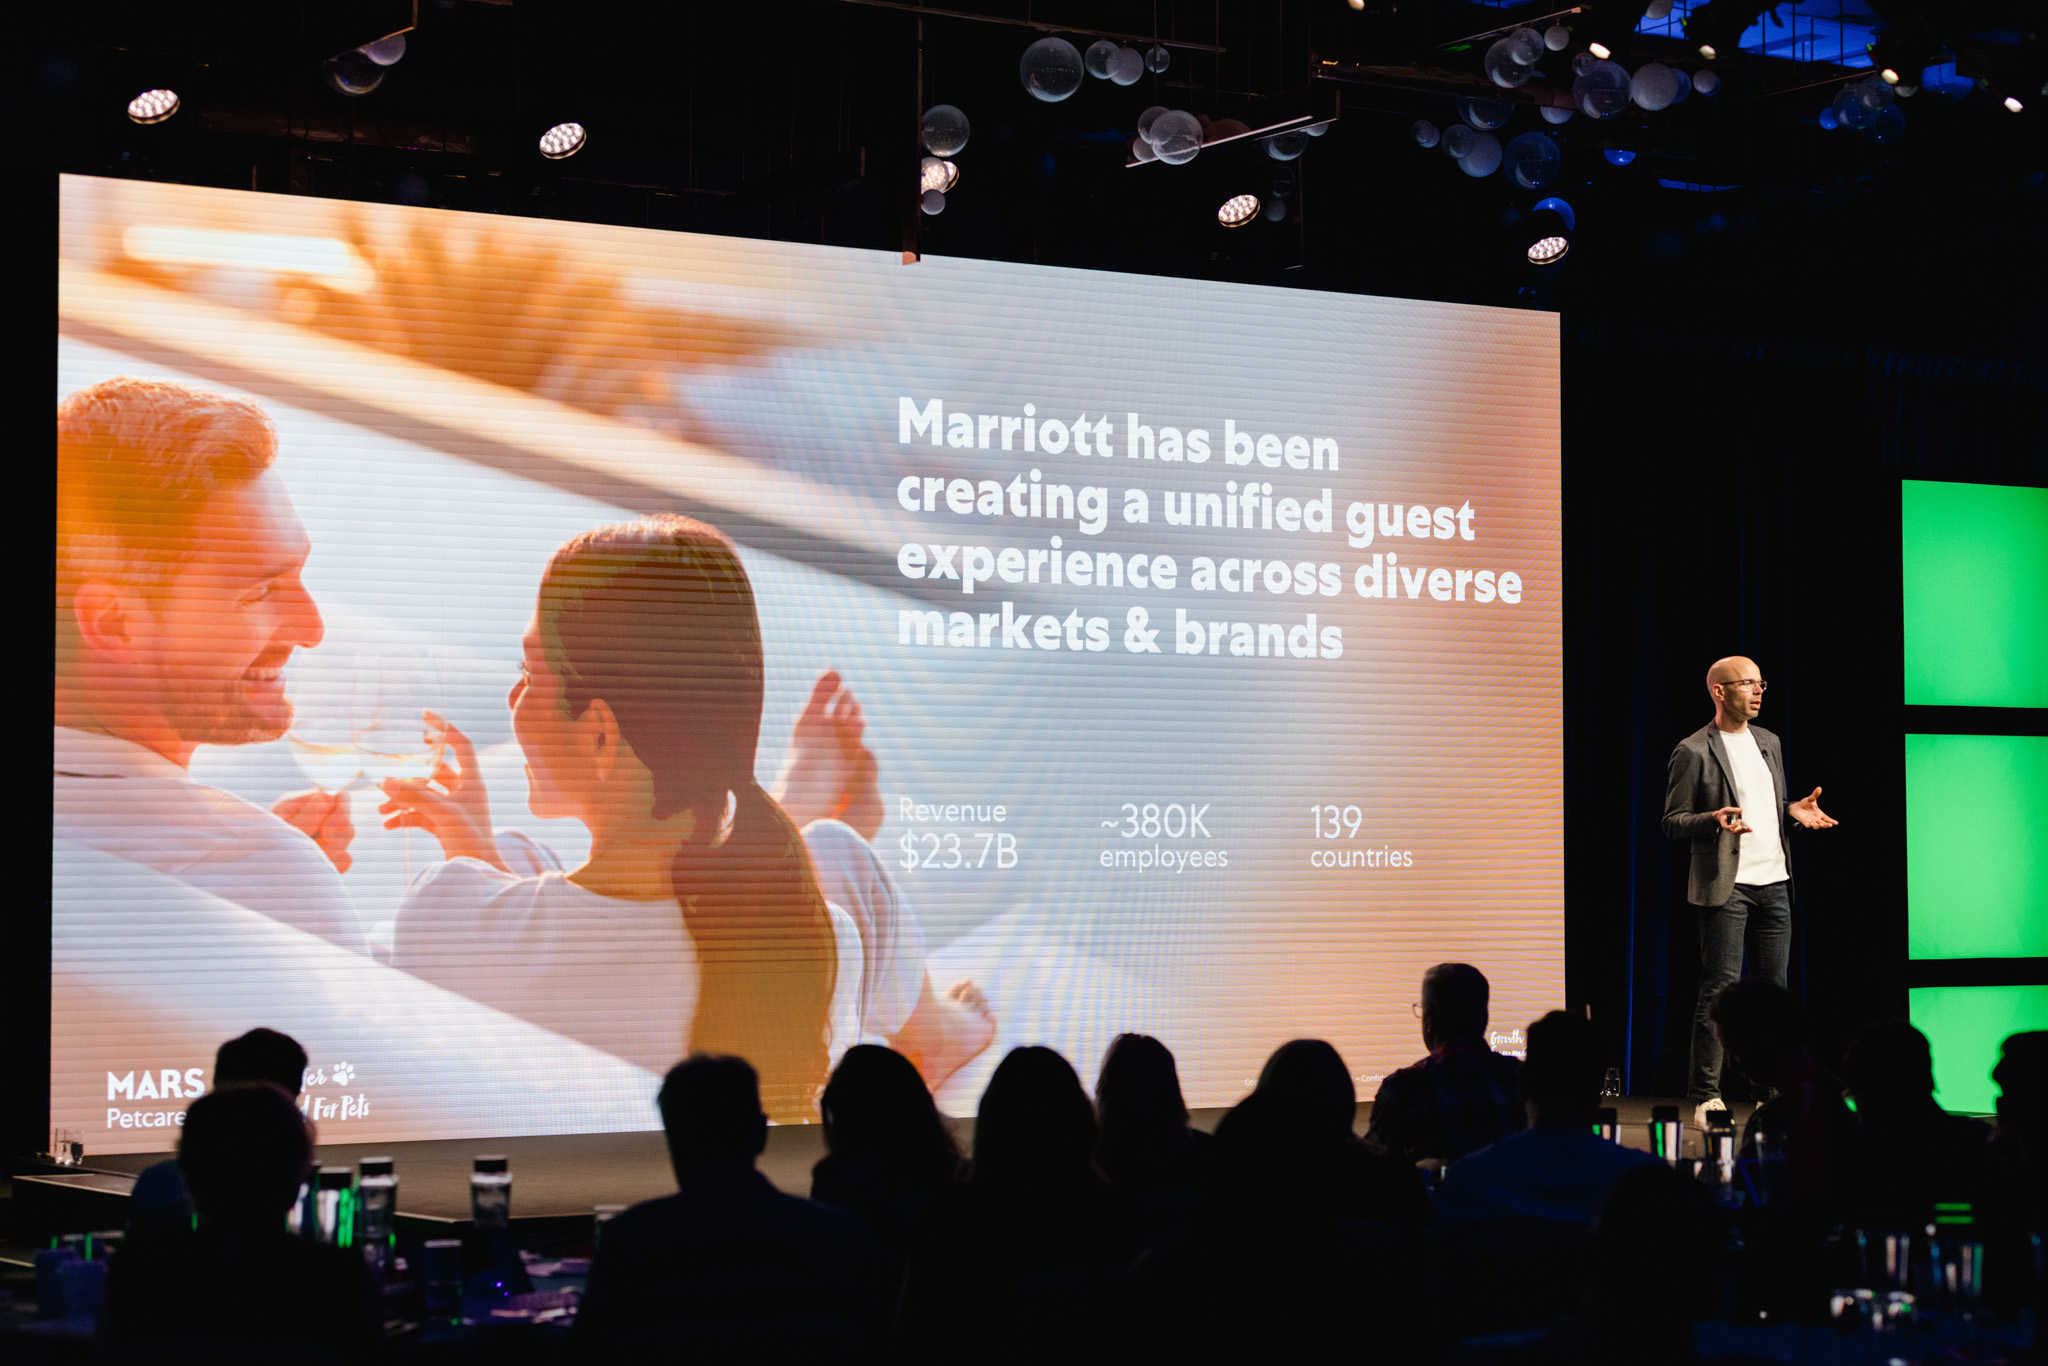 A speaker stands on stage next to a large screen with text about Marriott, captured in a moment of corporate photography. The audience is silhouetted in the foreground, while the presentation slide displays revenue, employee count, and operating countries.